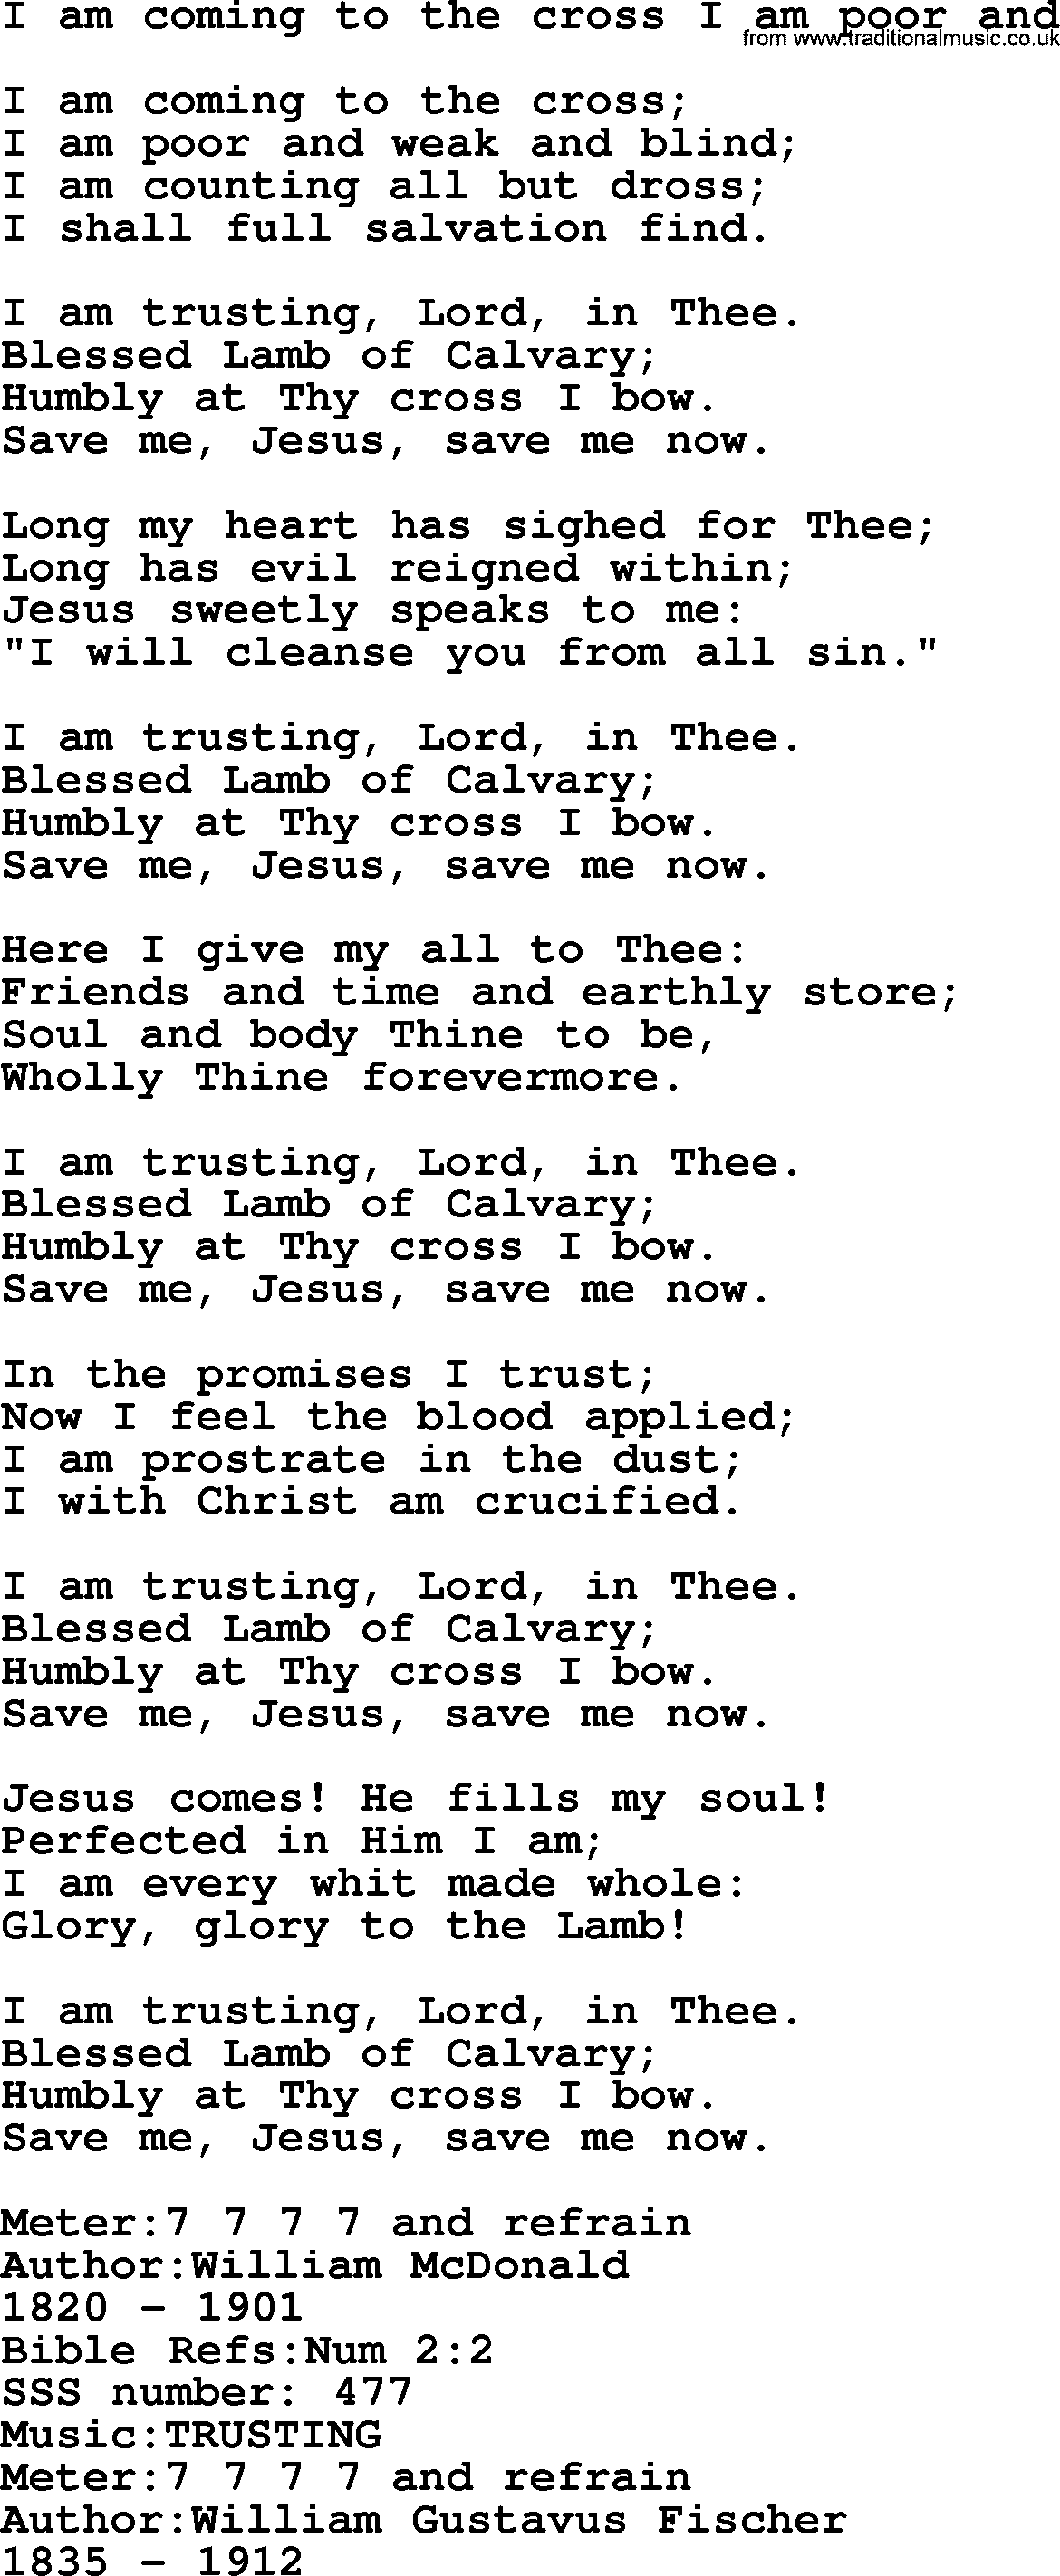 Sacred Songs and Solos complete, 1200 Hymns, title: I Am Coming To The Cross I Am Poor And, lyrics and PDF